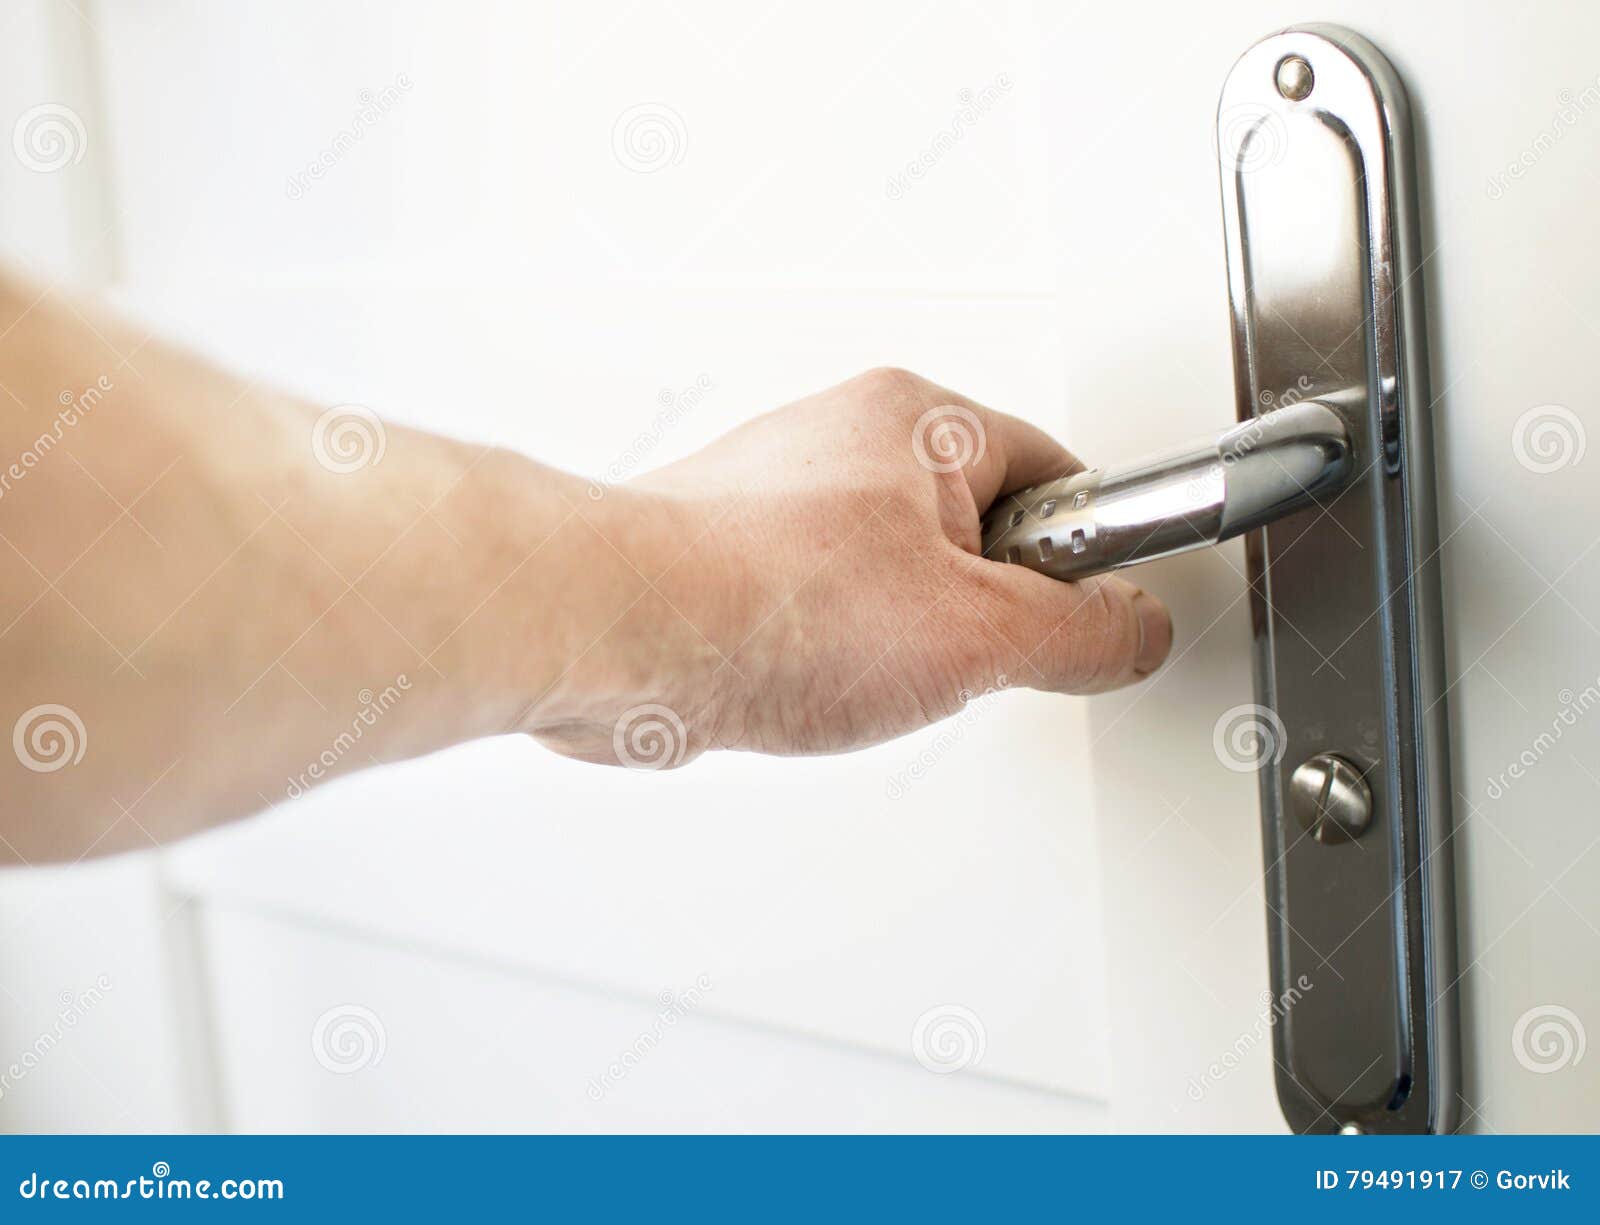 the process of clicking on the handle to open the door